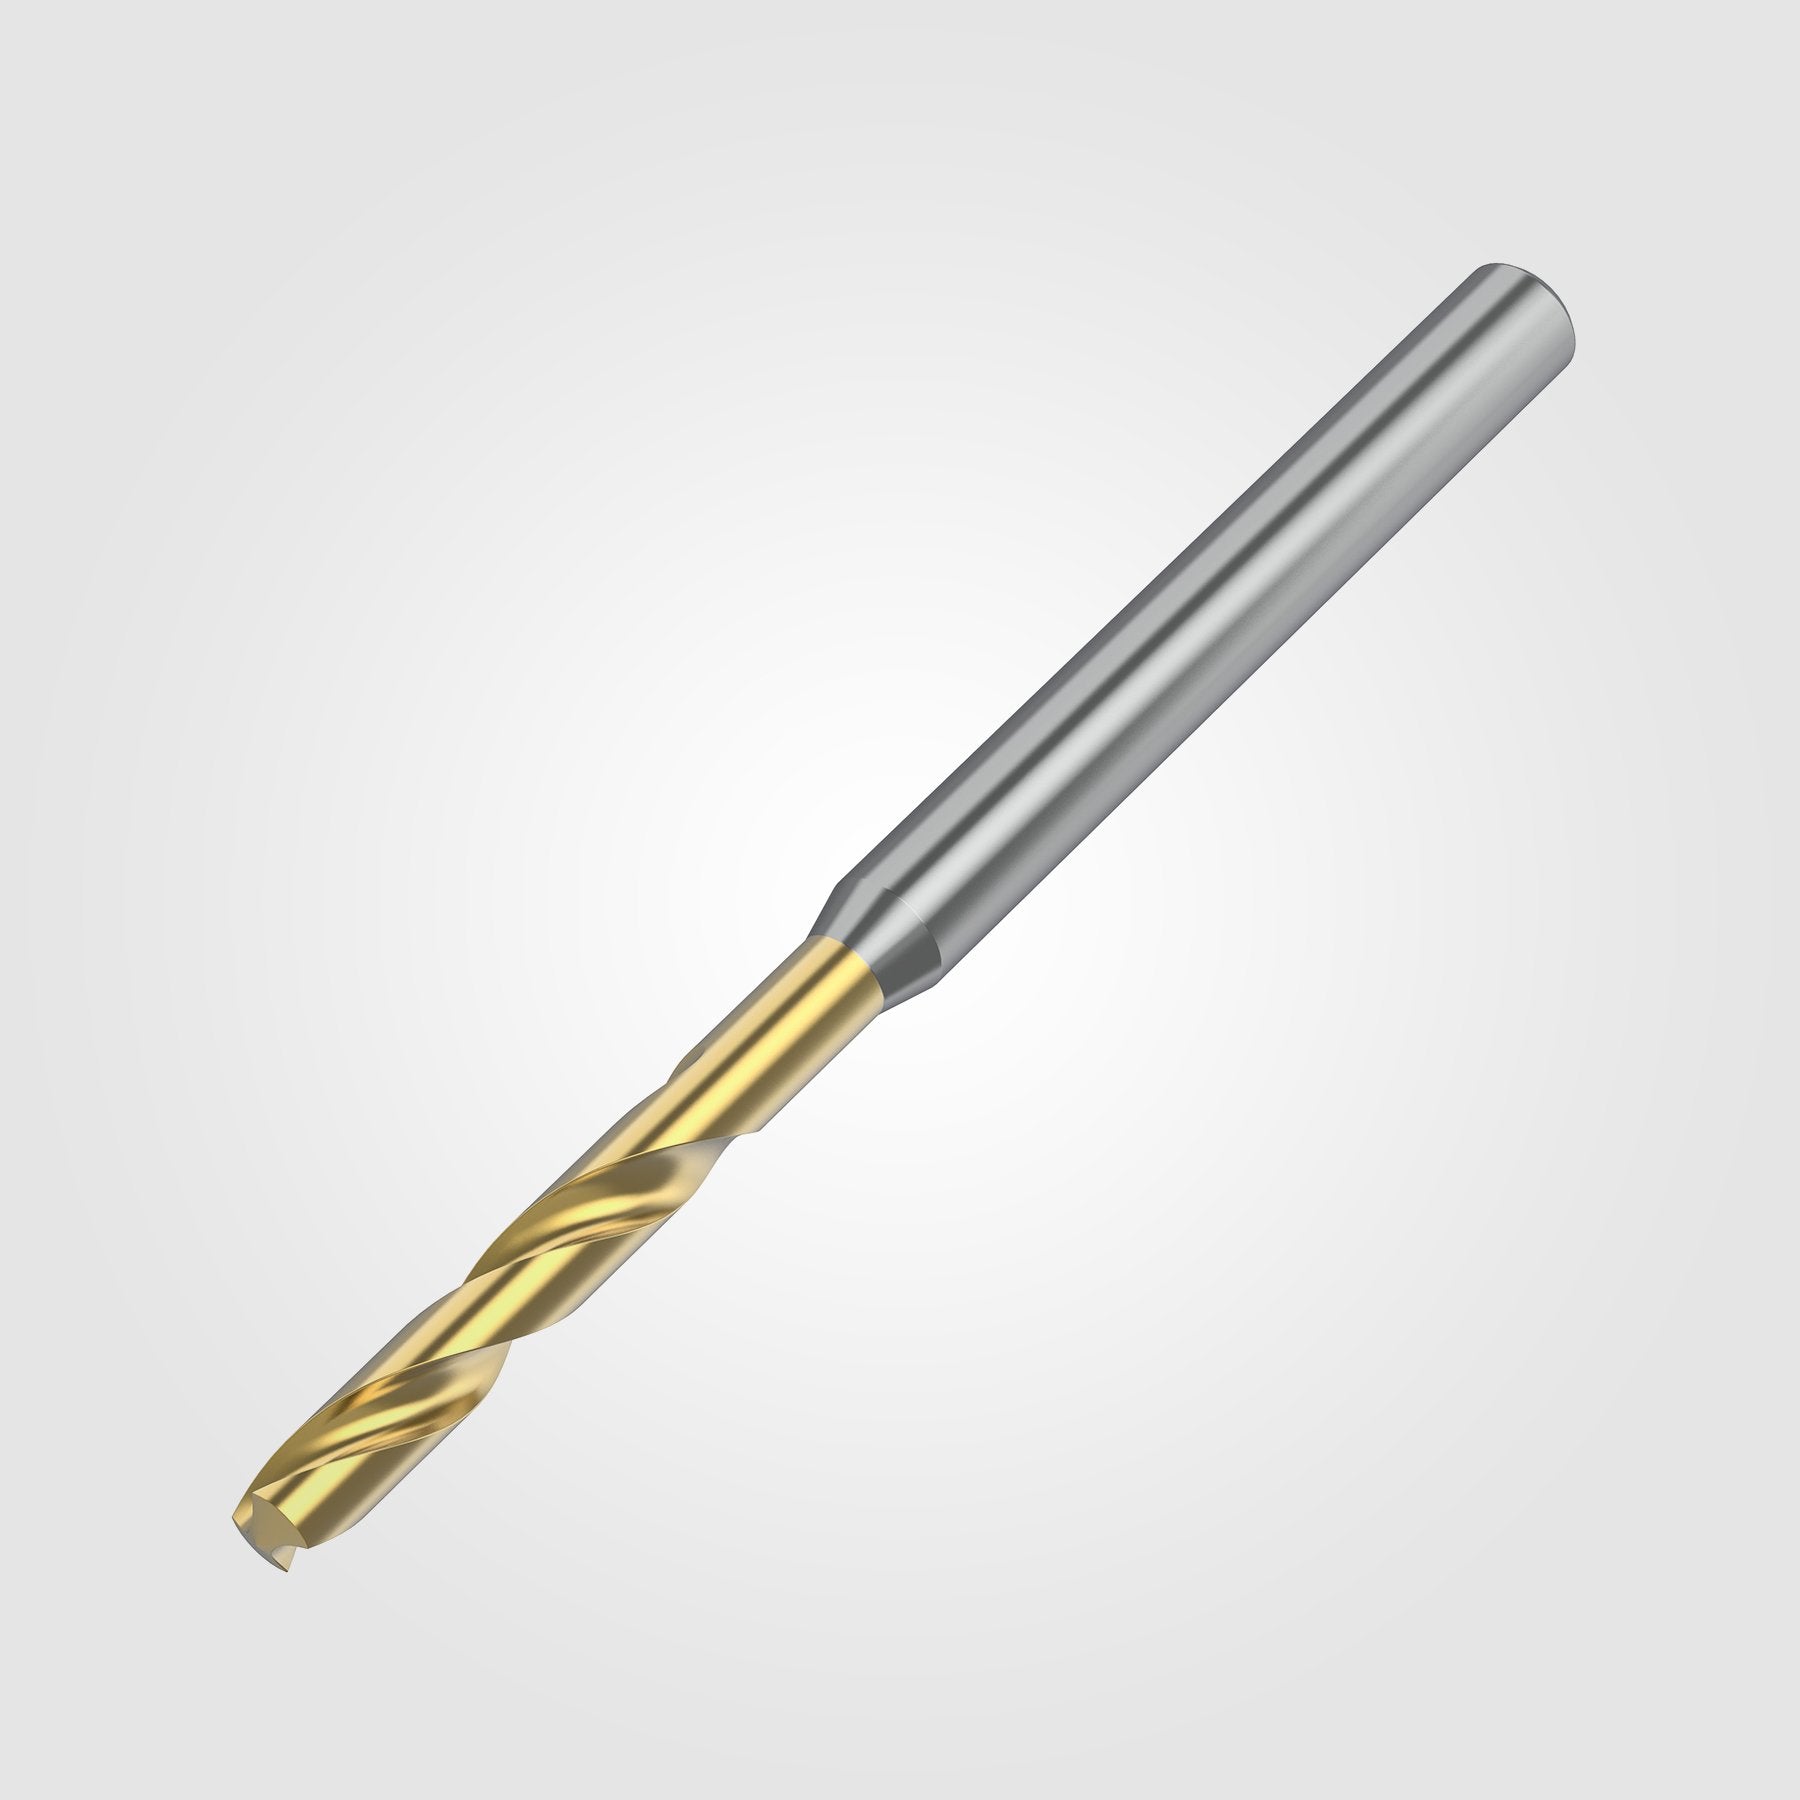 GOdrill (THROUGH COOLANT) | 9.5mm / .3740" / 3xD | SOLID CARBIDE DRILL | 4151195